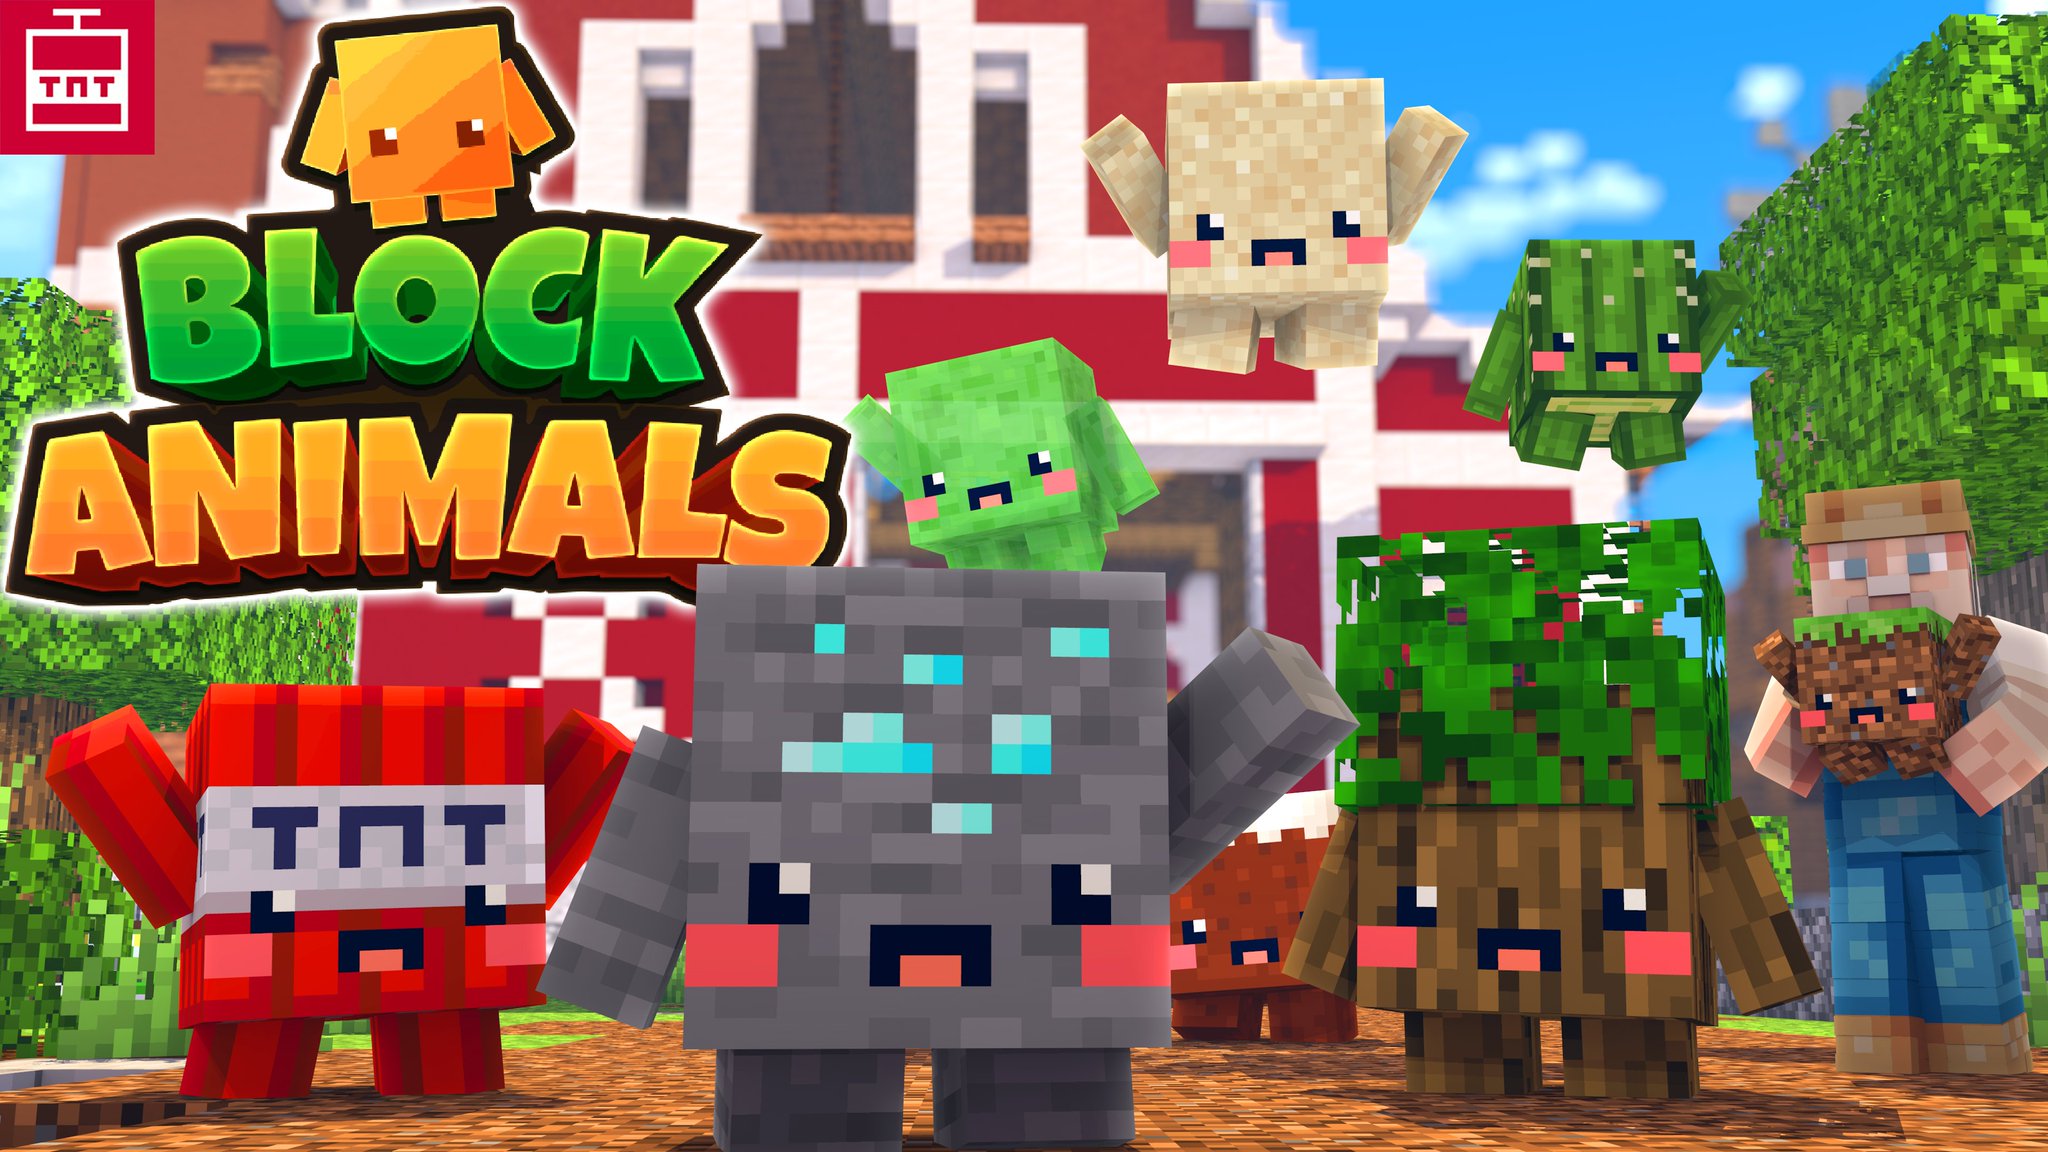 TNTgames on Super cute Block Animals releasing this week